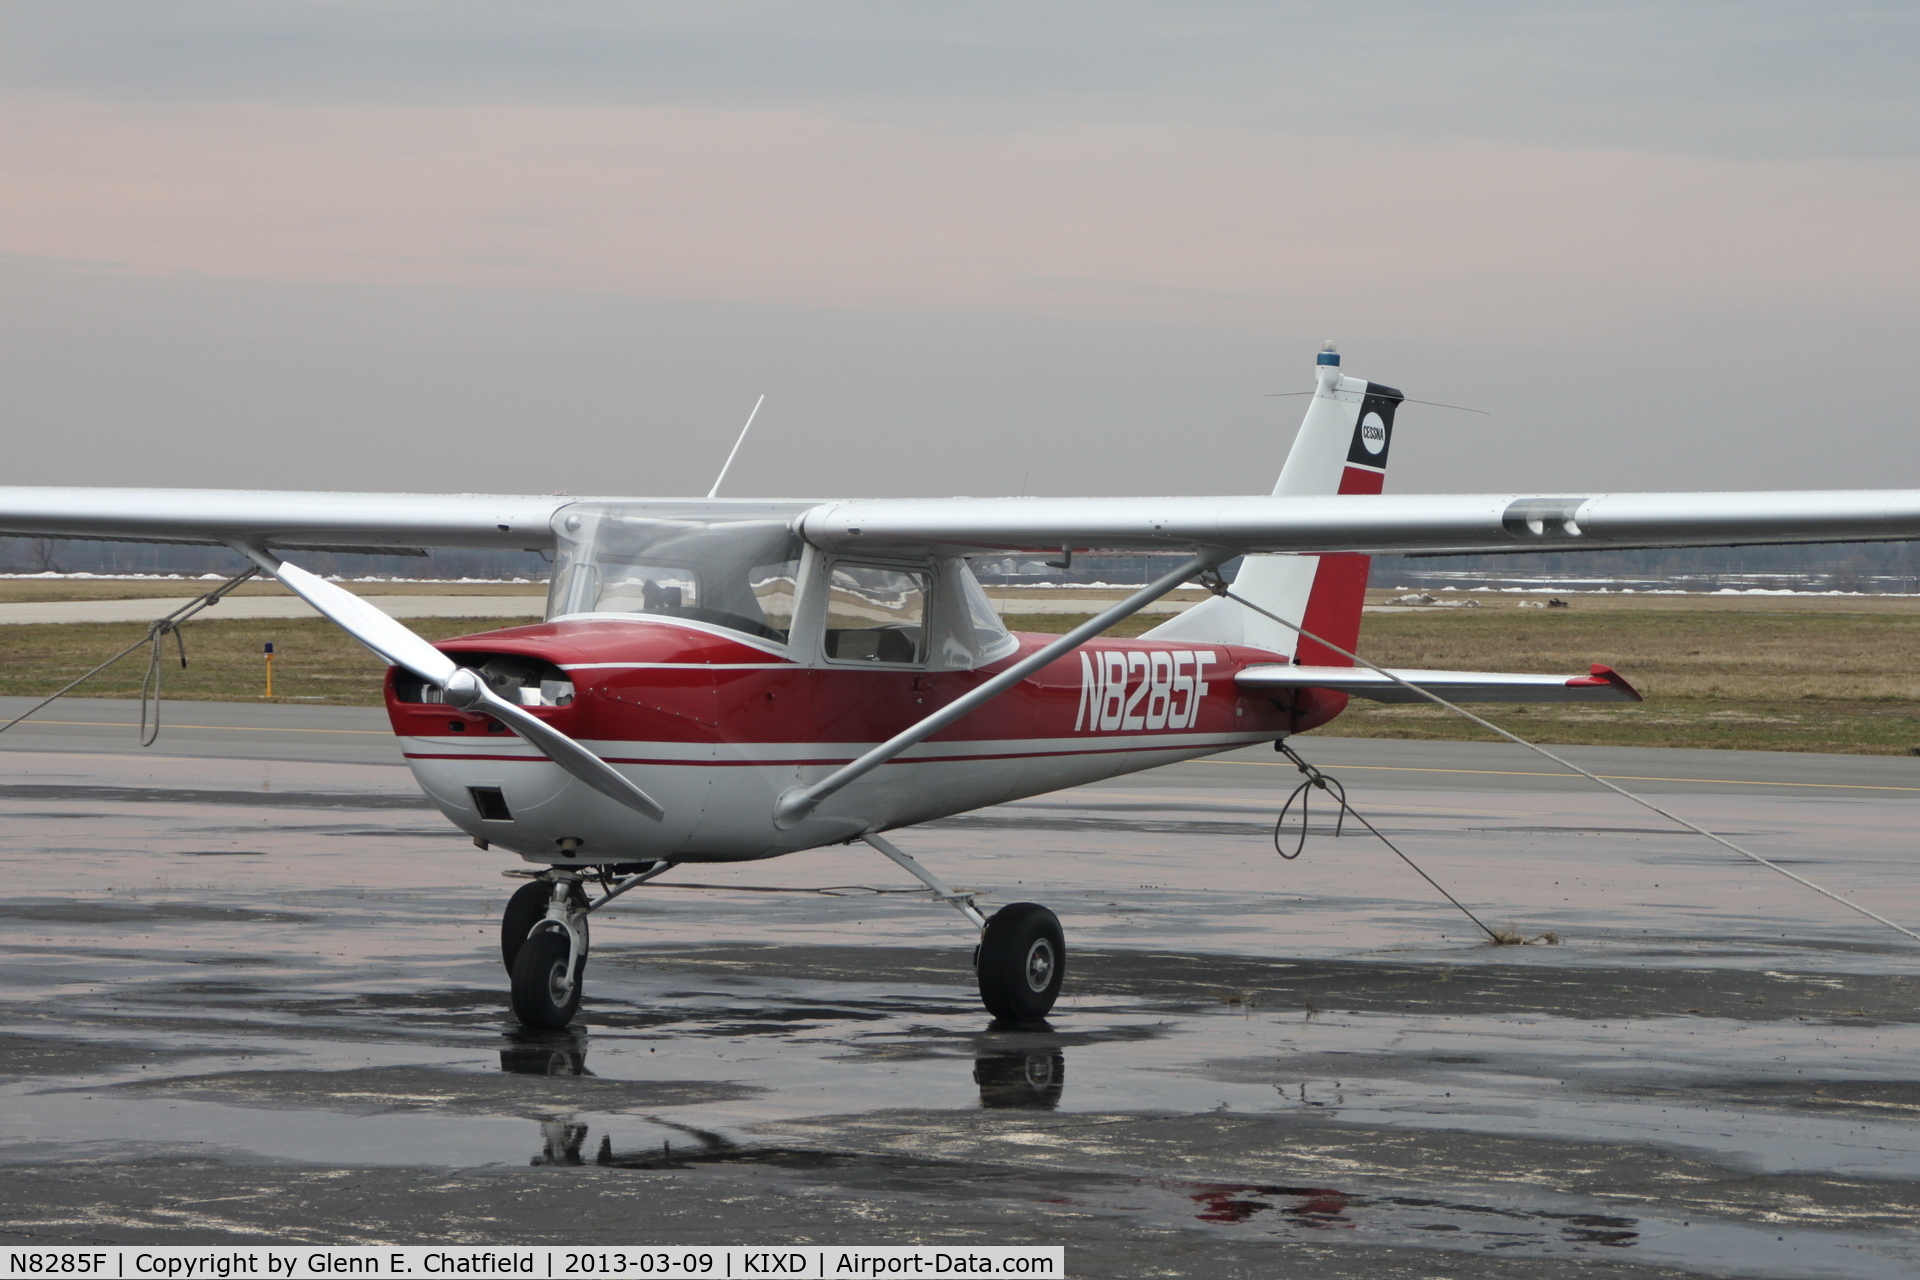 N8285F, 1966 Cessna 150F C/N 15064385, Old, but very clean